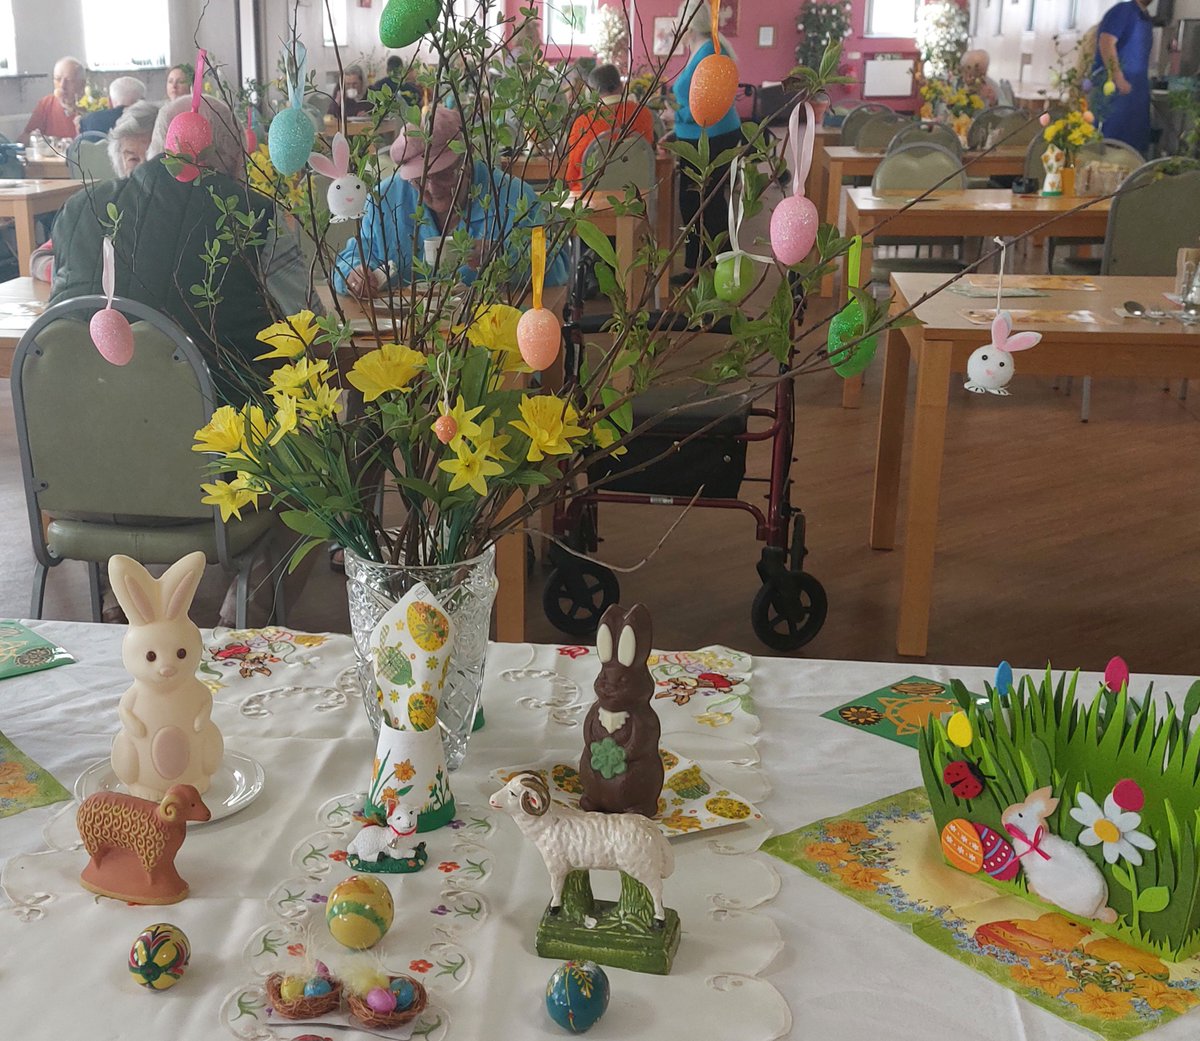 Easter blessings and delicious feasts at Penrhos Polish Village! Embracing traditions with 24 baskets of food being blessed from Pwllheli & Porthmadog families. Then, Sunday was a communal meal nestled in a dining room graced with Maria's exquisite decorations🐣🌼